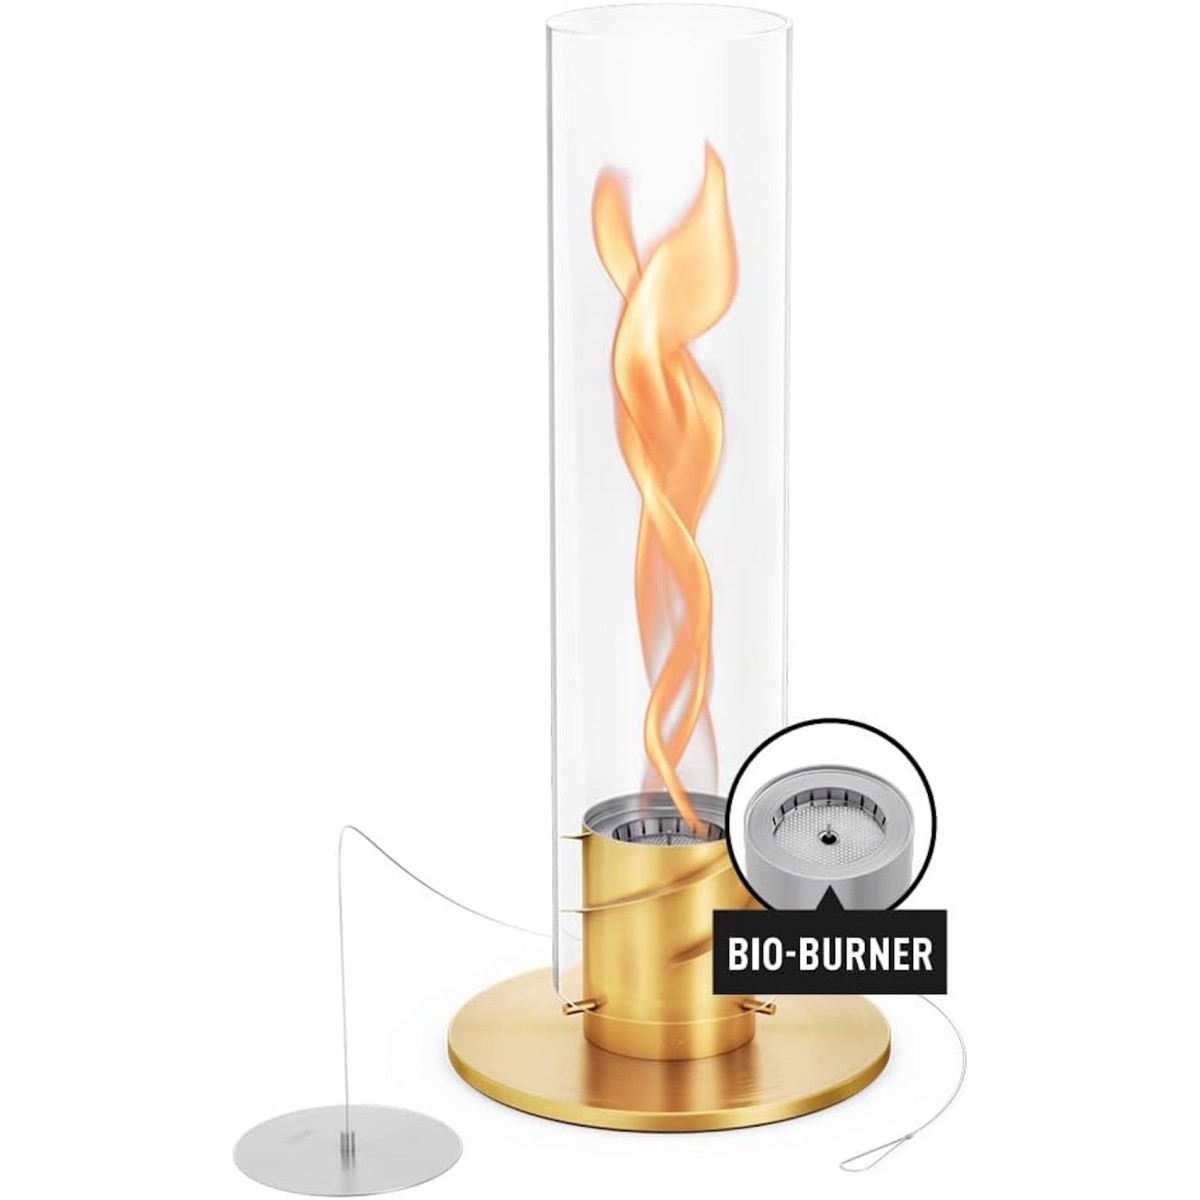 HOFATS SPIN 1200 tabletop fireplace with bio-burner- gold